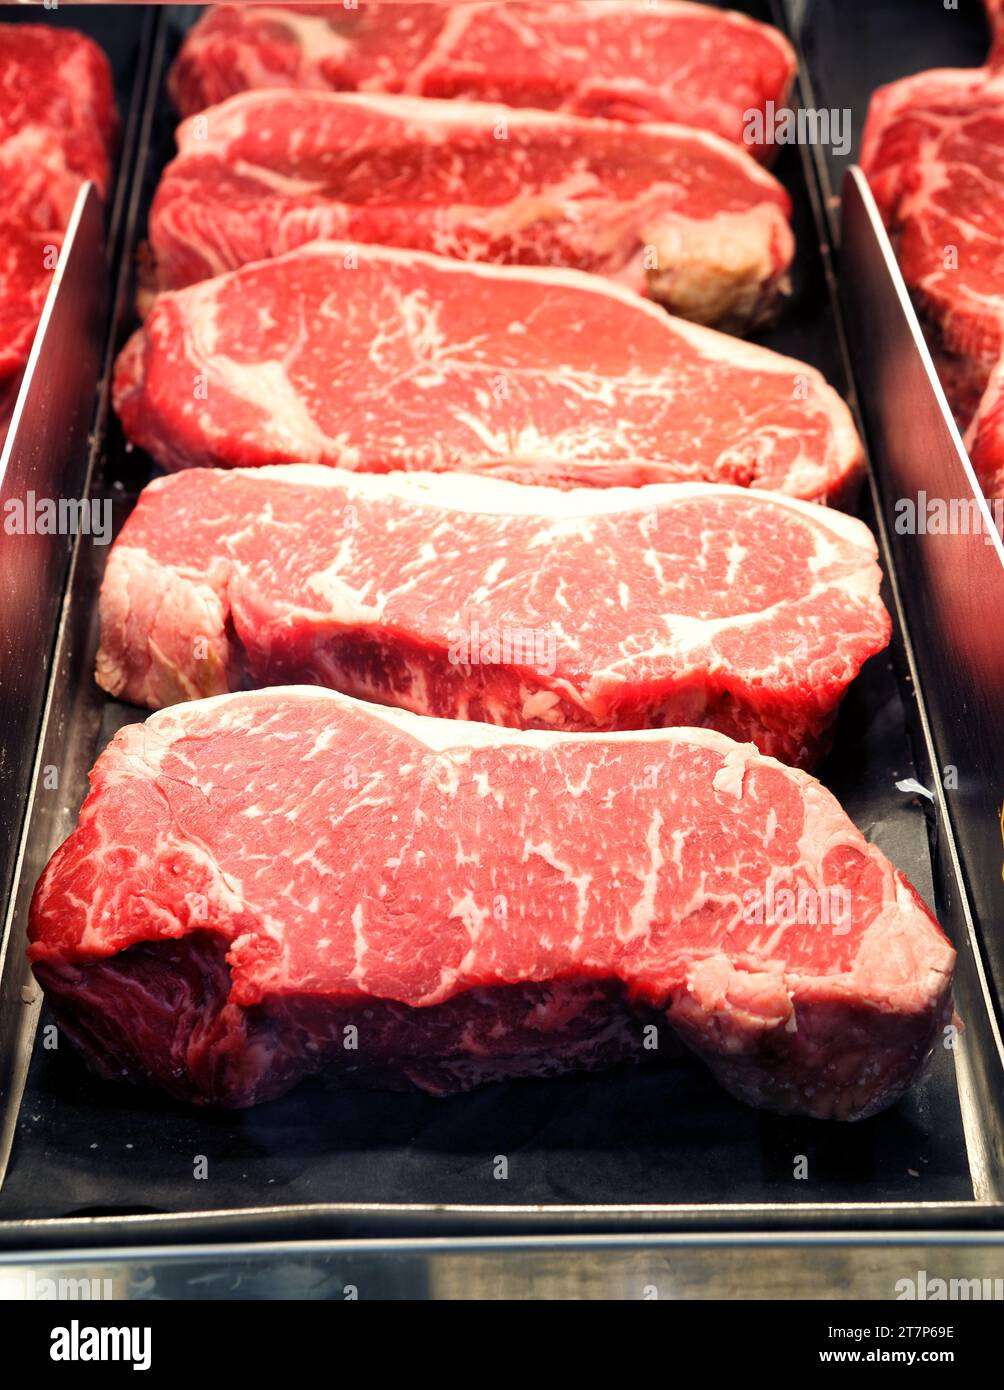 A display cooler filled with fresh cut ribeye steaks for sale in a modern butcher shop. Stock Photo